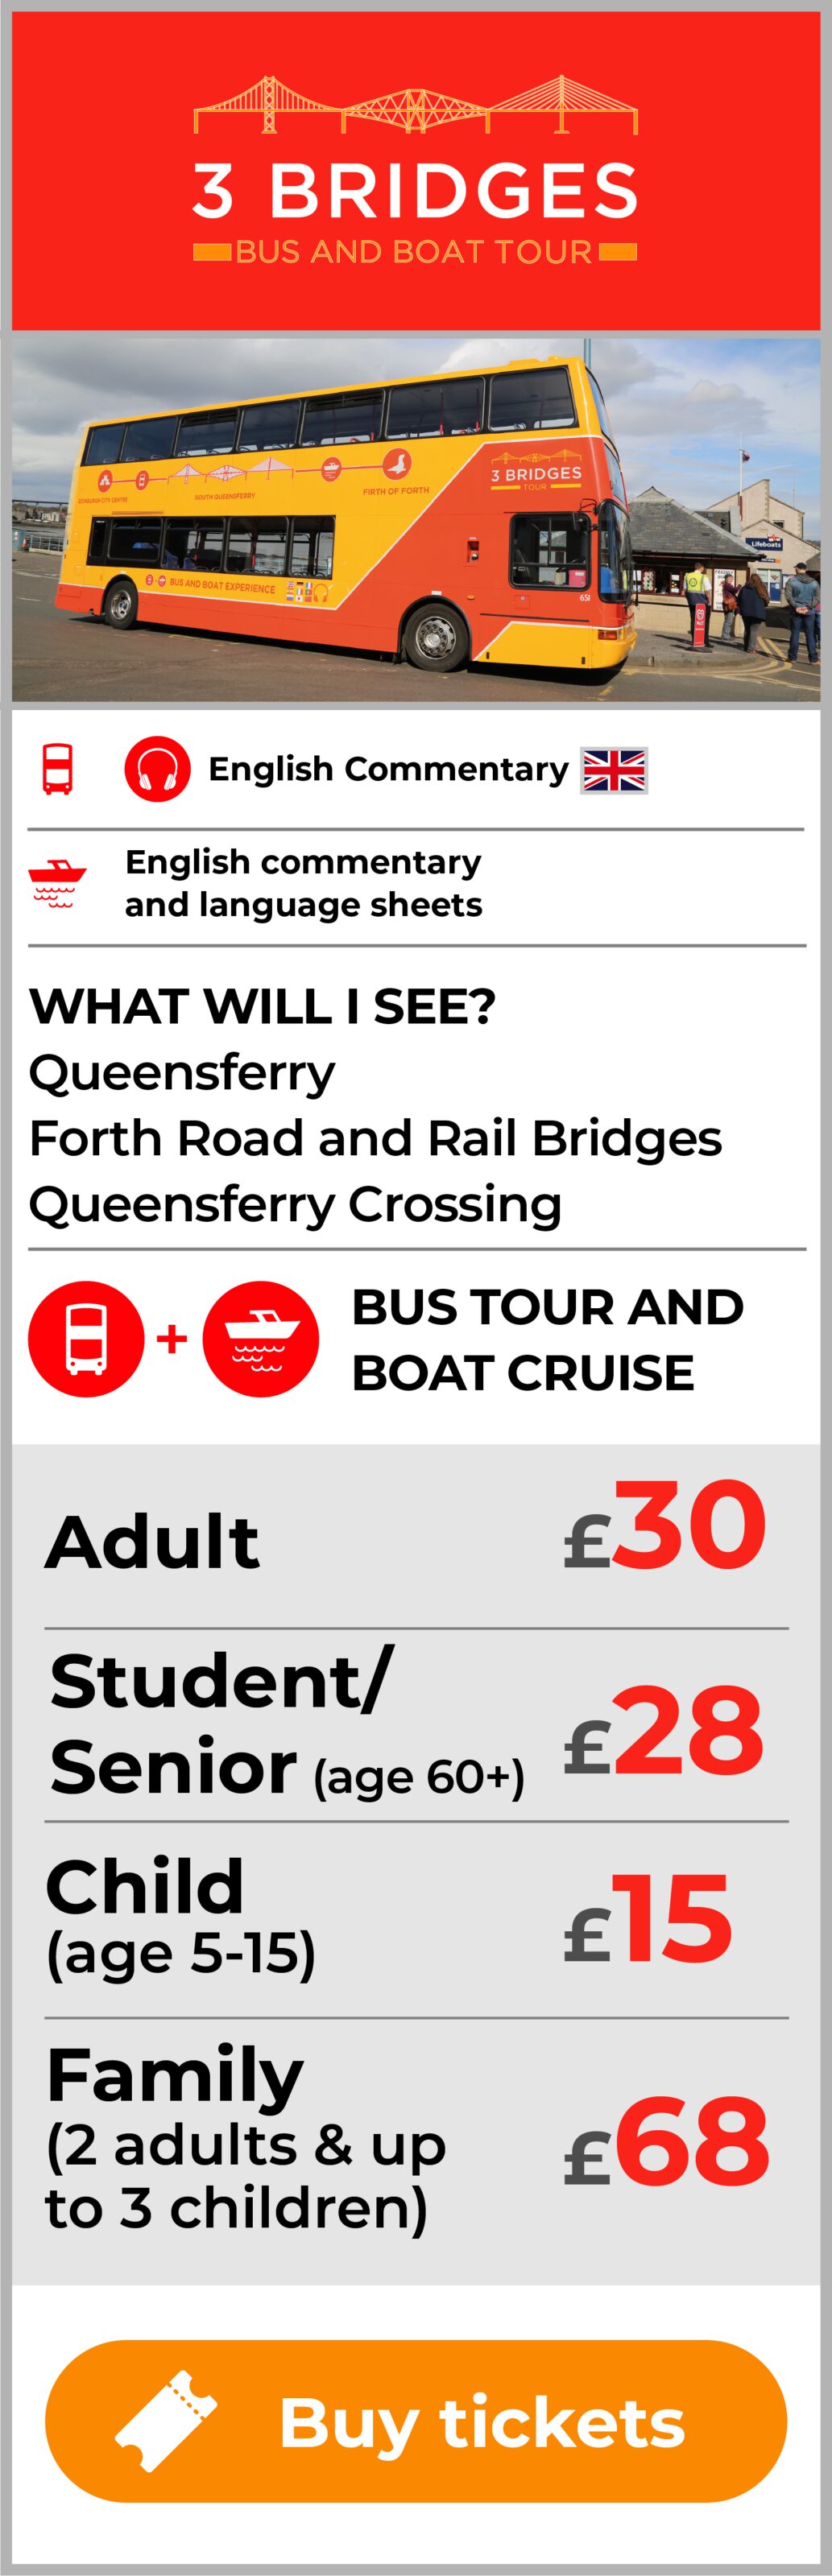 3 Bridges Tour includes Queensferry Forth Road and Rail Bridges Queensferry Crossing. £28 for adult and £26 for senior ticket.